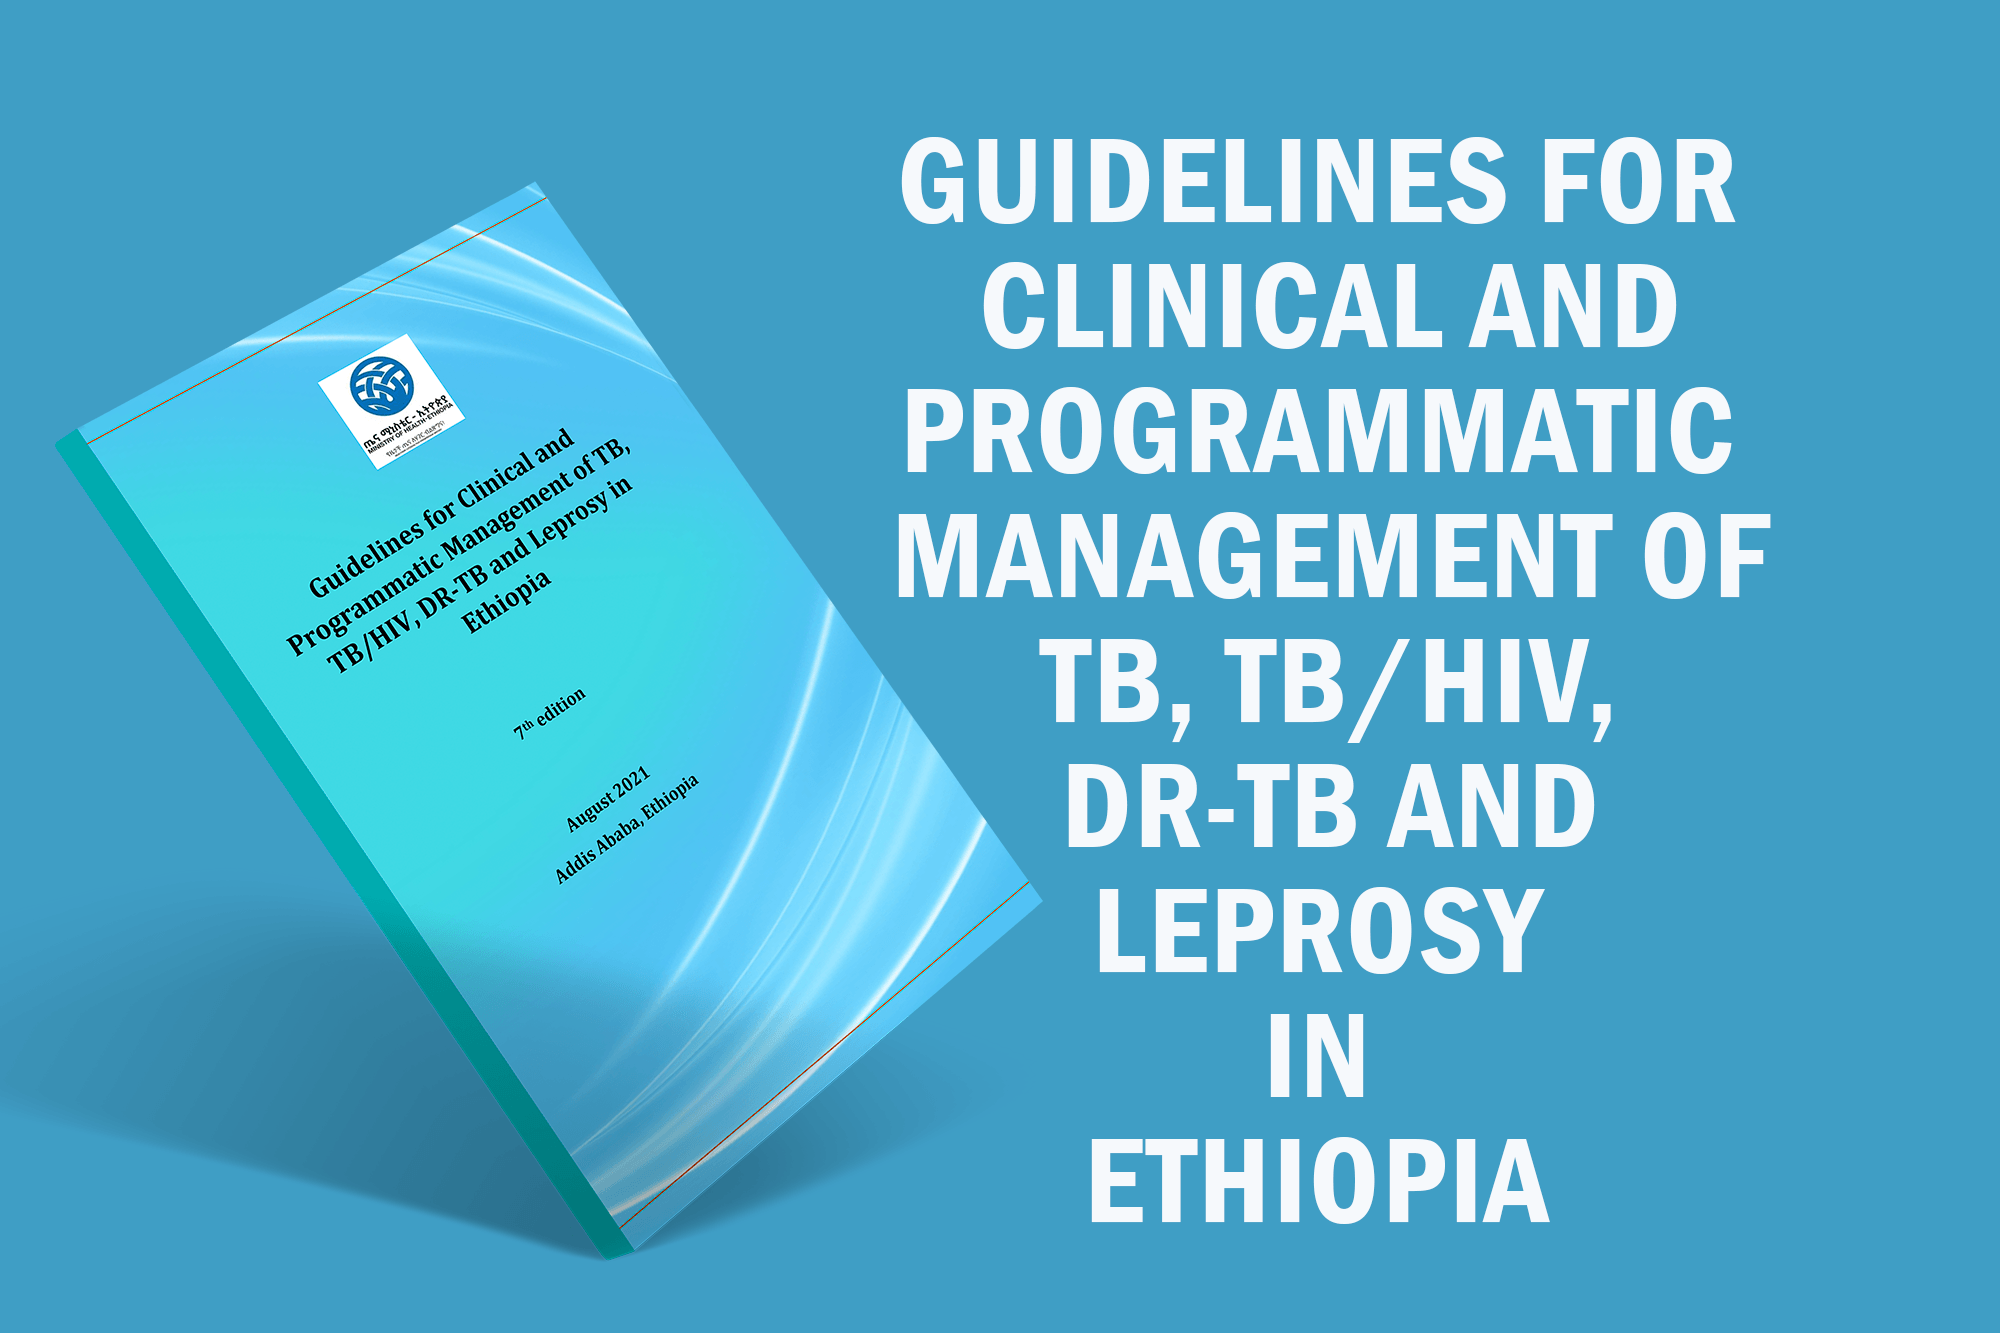 Guidelines for Clinical and Programmatic Management of TB, TB/HIV, DR-TB and Leprosy in Ethiopia